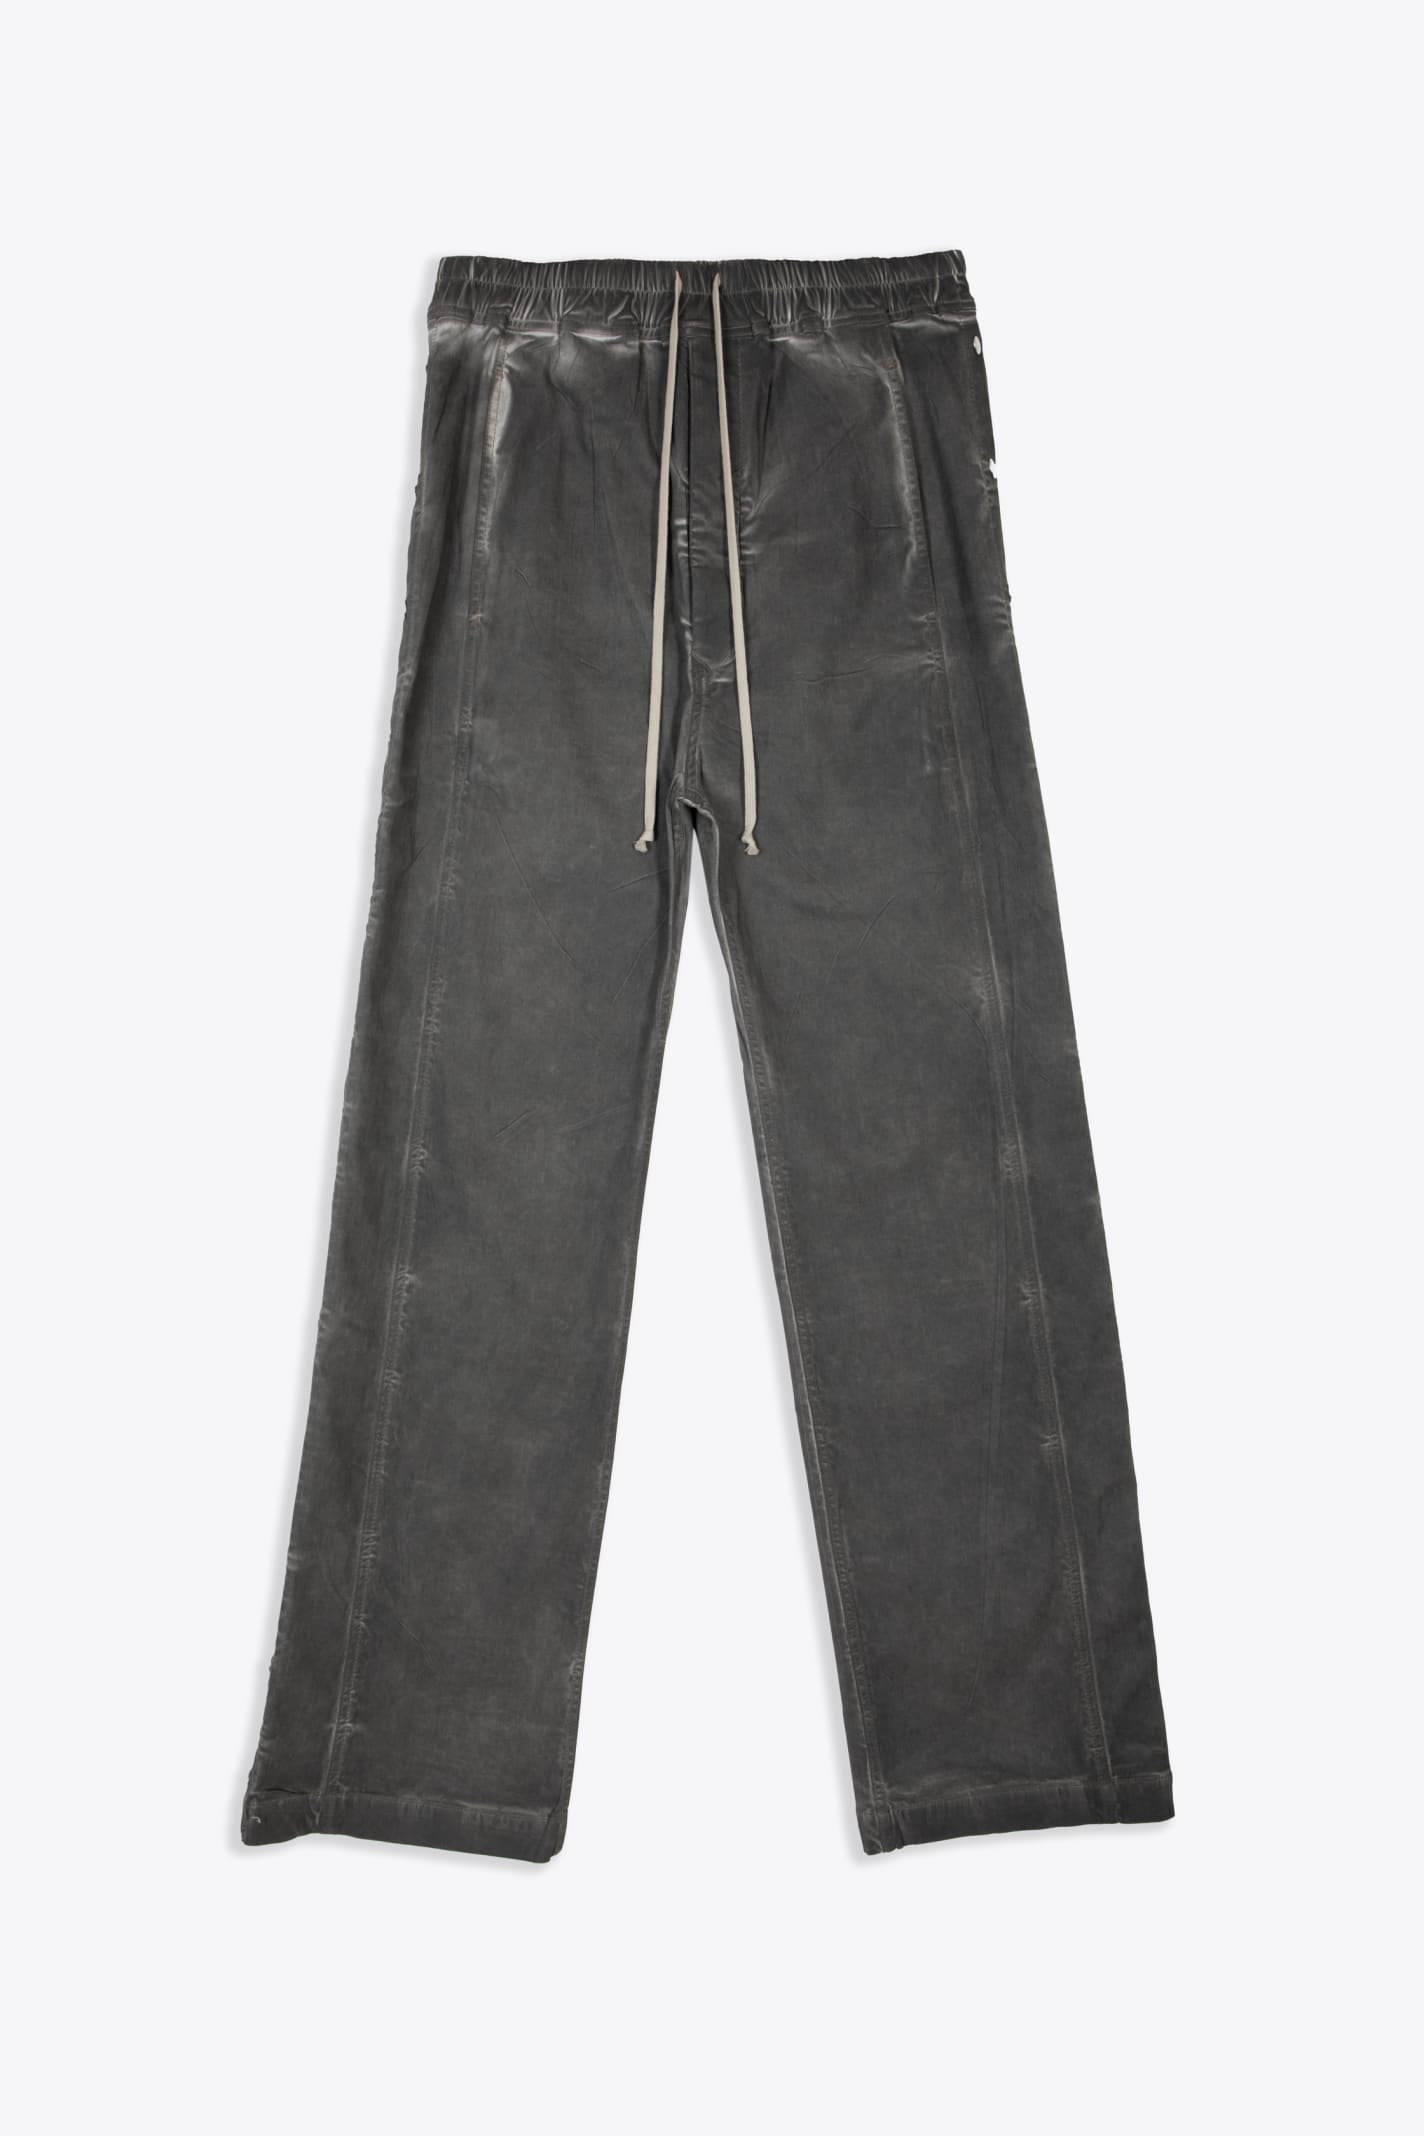 Pusher Pants Dark Grey Waxed Cotton Pants With Side Snaps - Pusher Pants